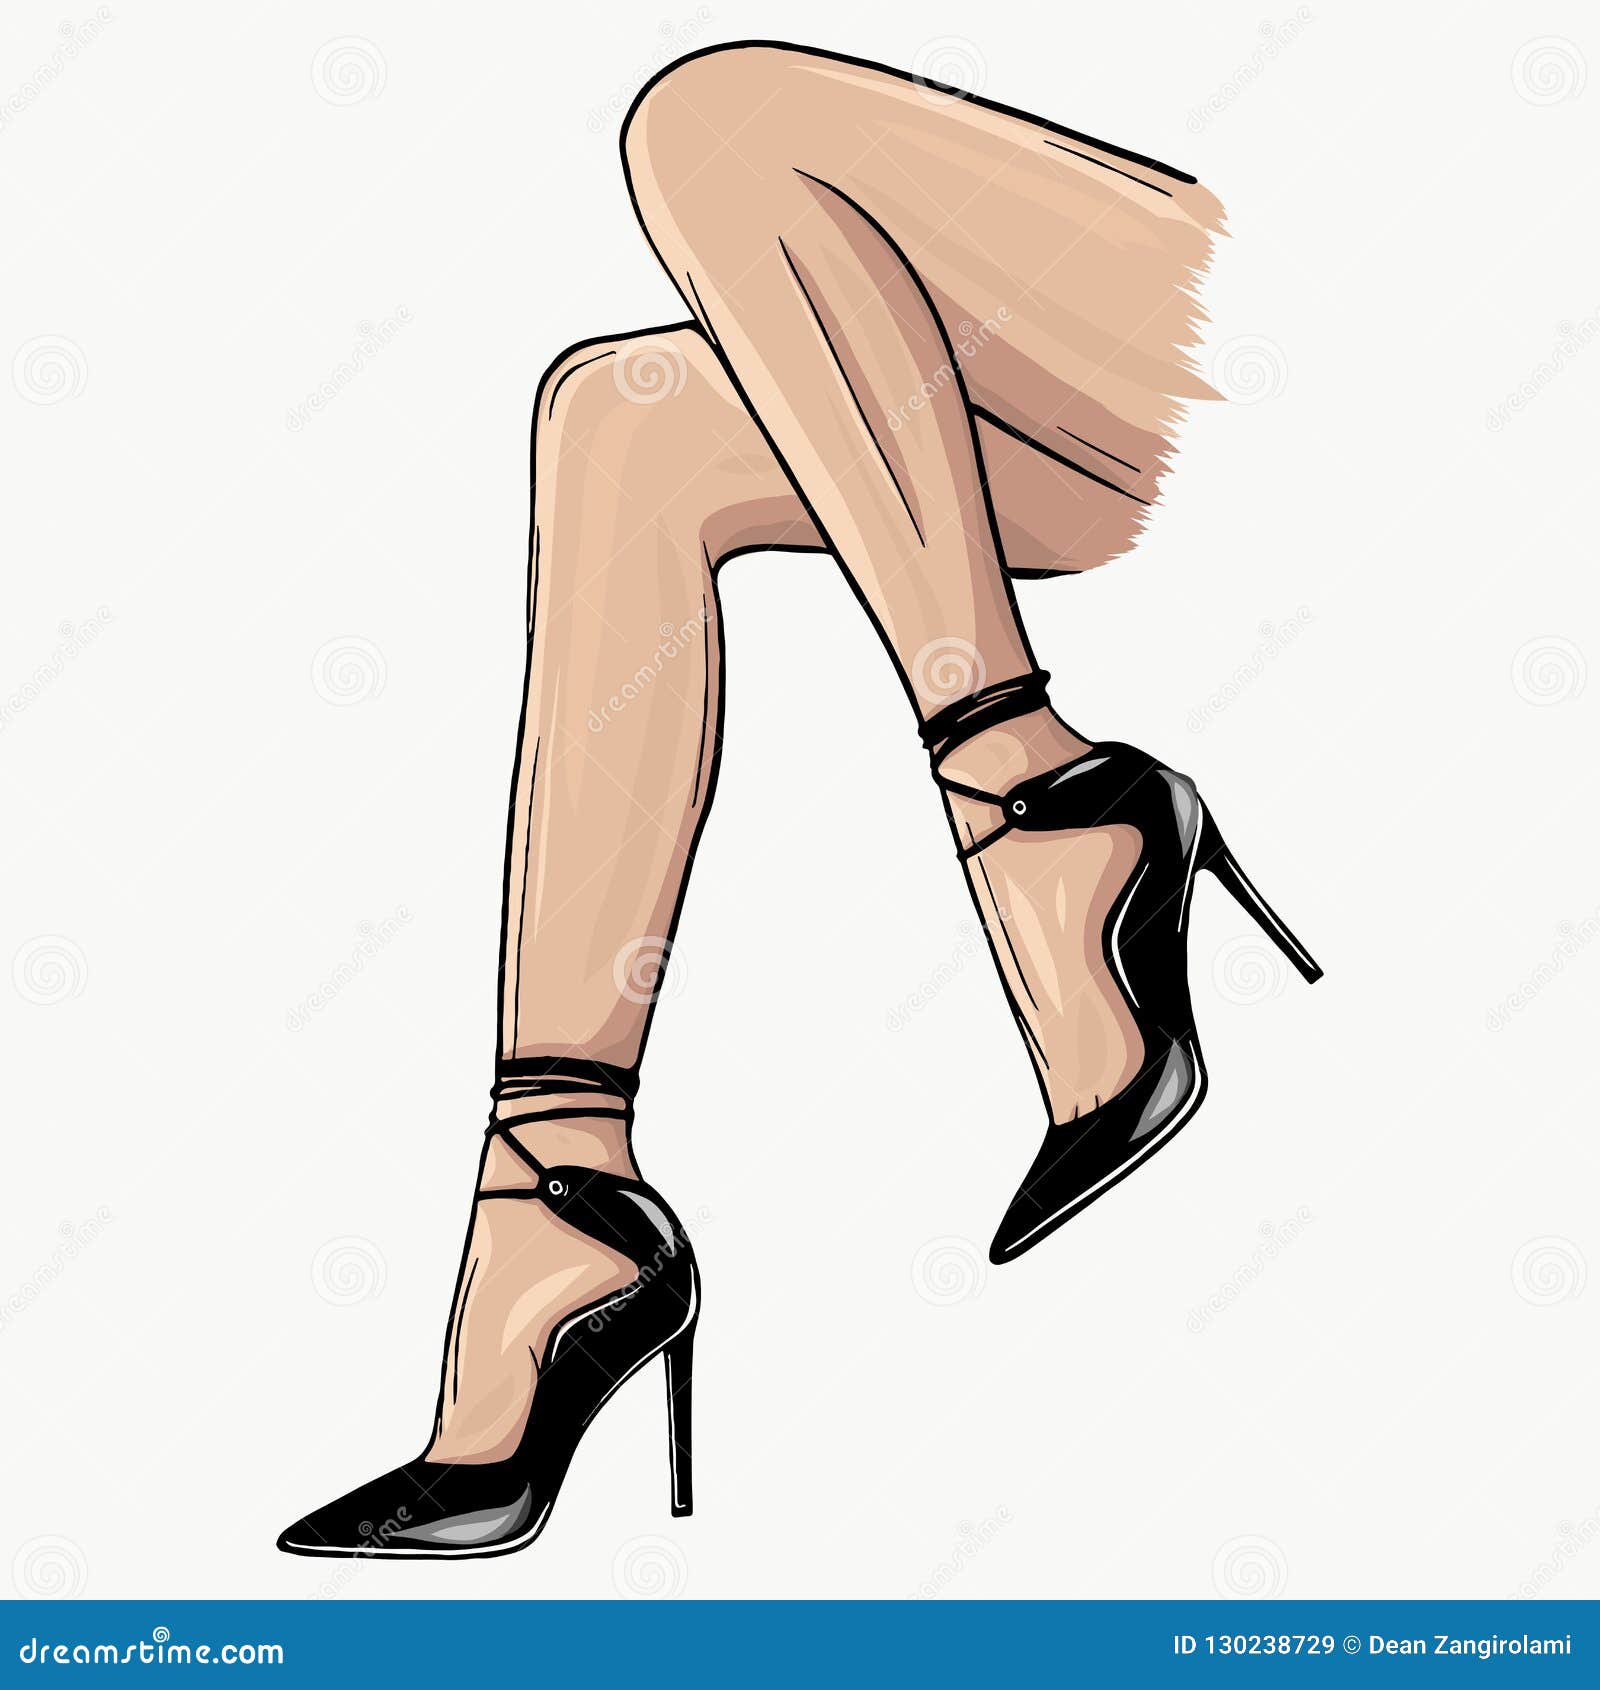 Design Footwear: Over 174,843 Royalty-Free Licensable Stock Illustrations &  Drawings | Shutterstock